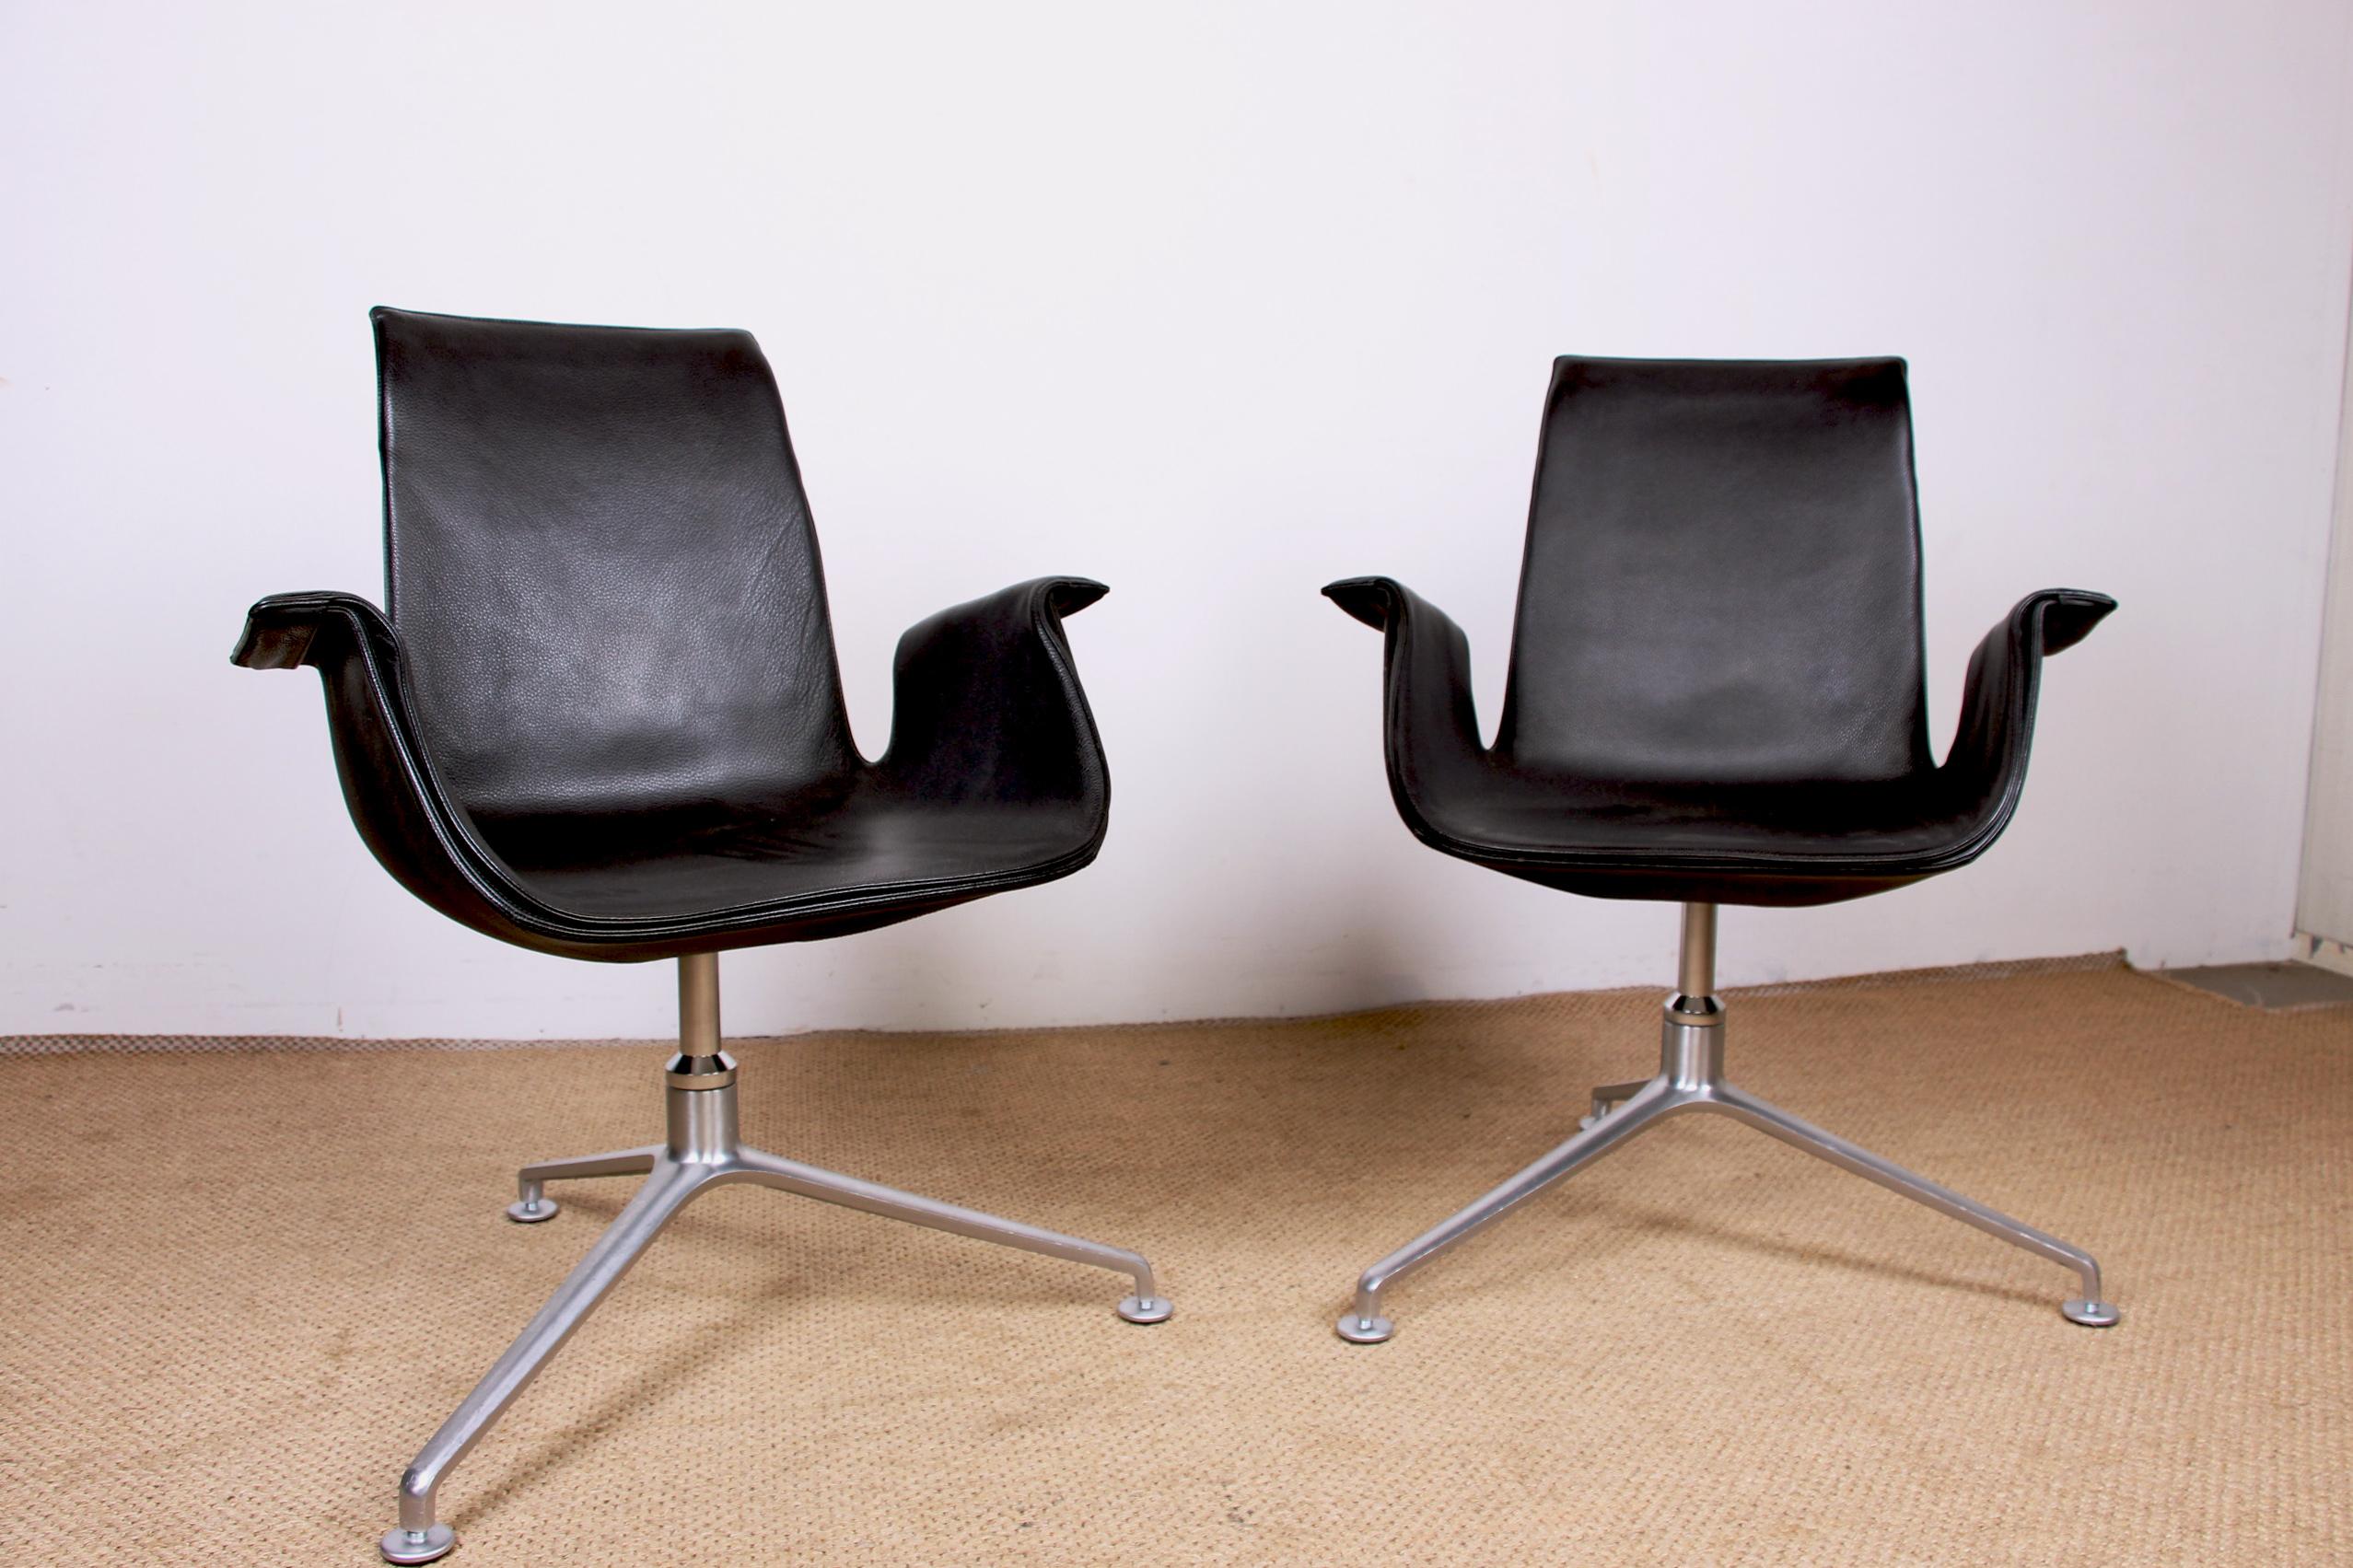 Superb Scandinavian armchairs. Structure with three legs in Chromed Steel, seats and backs in cowhide leather in excellent condition. This piece of furniture comes from the premises of the International Automobile Federation at Place Vendôme in